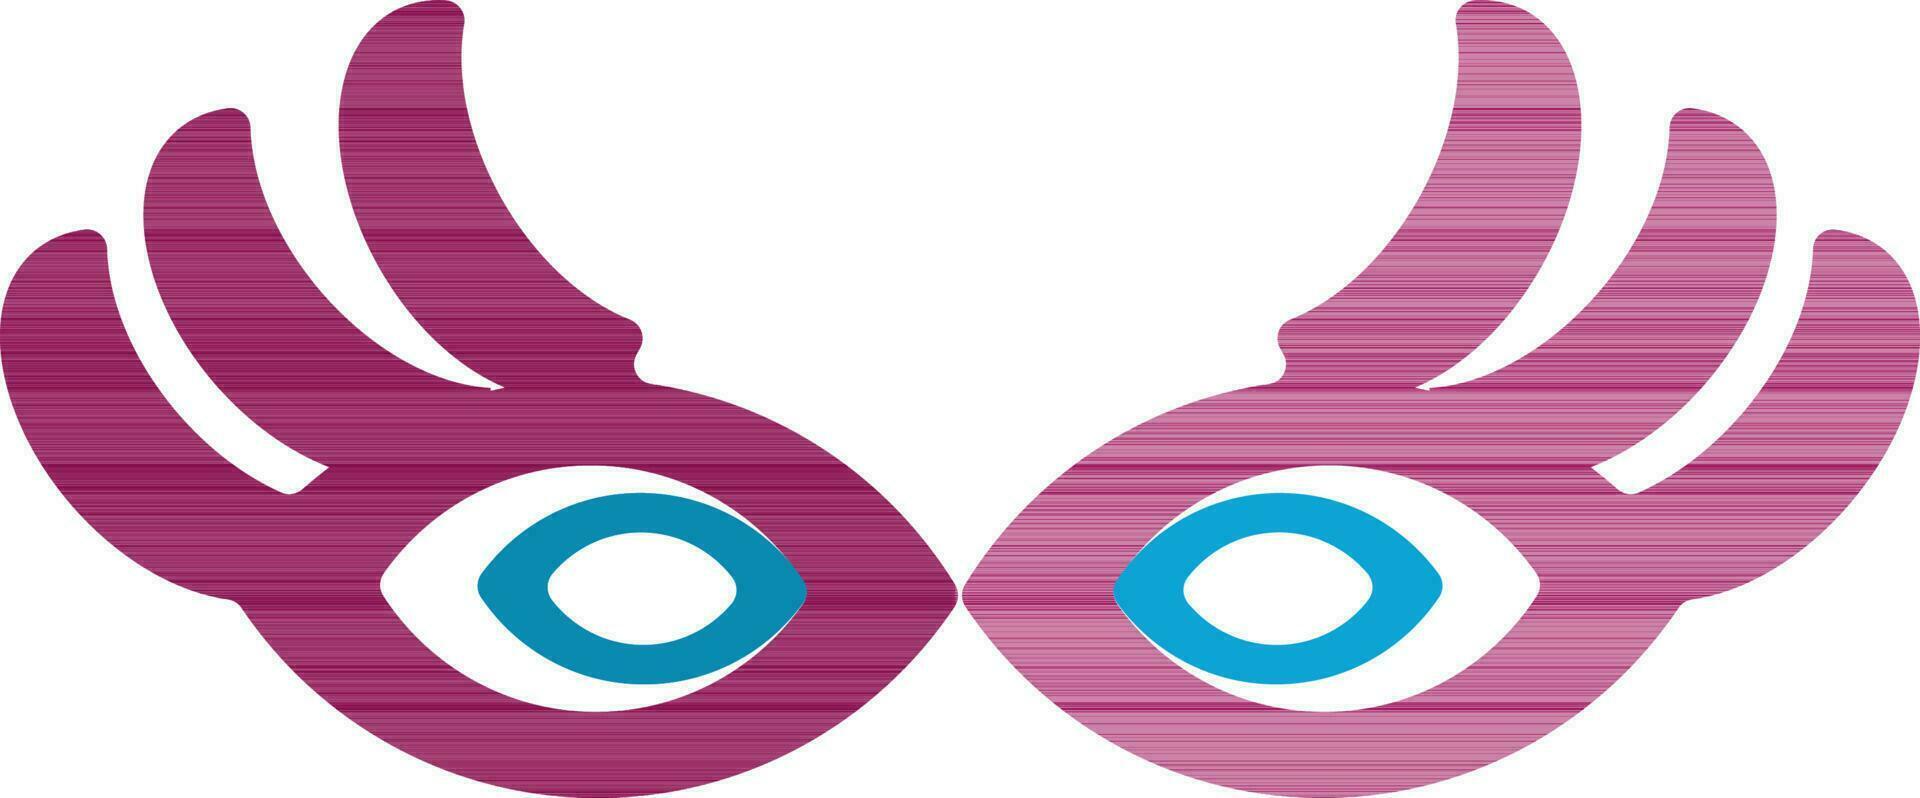 Illustration of a pink and blue masquerade mask. vector